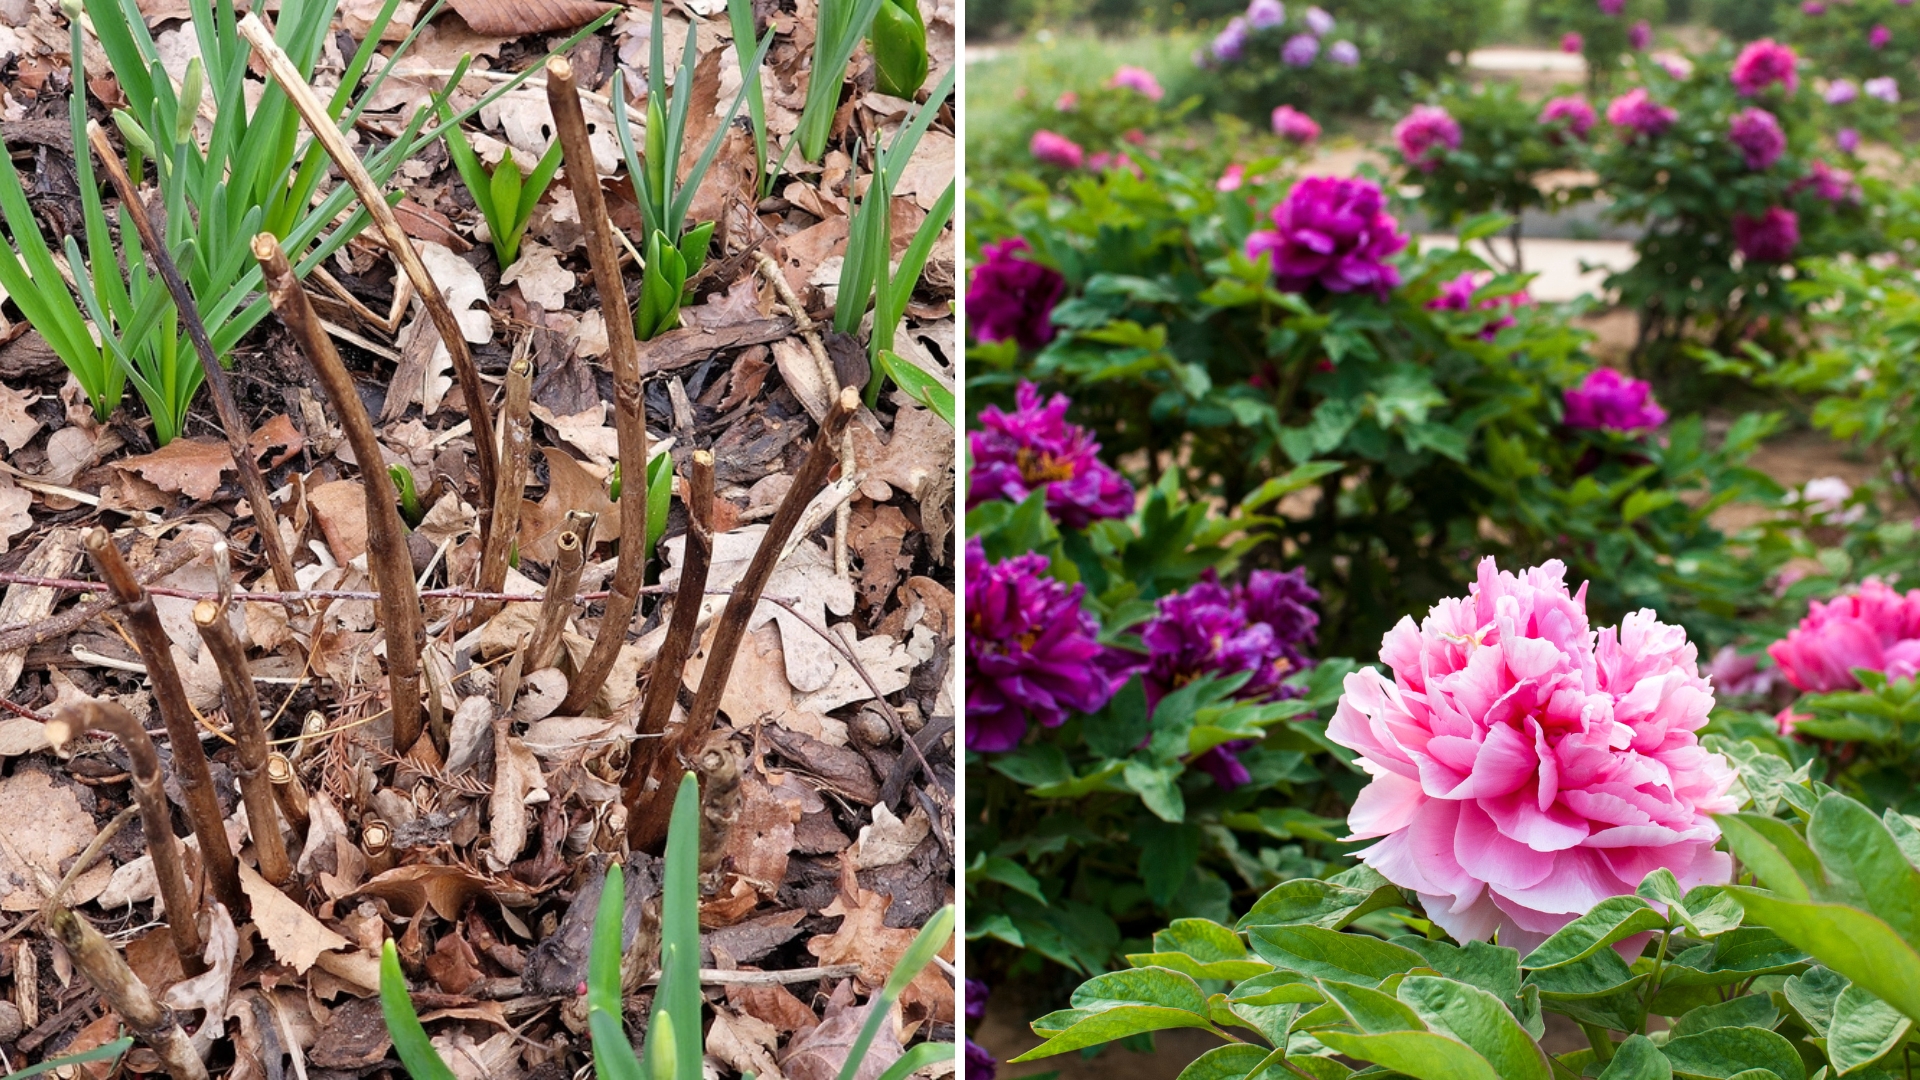 Here’s When You Should Cut Back Peonies For An Explosion Of Blossoms Next Season